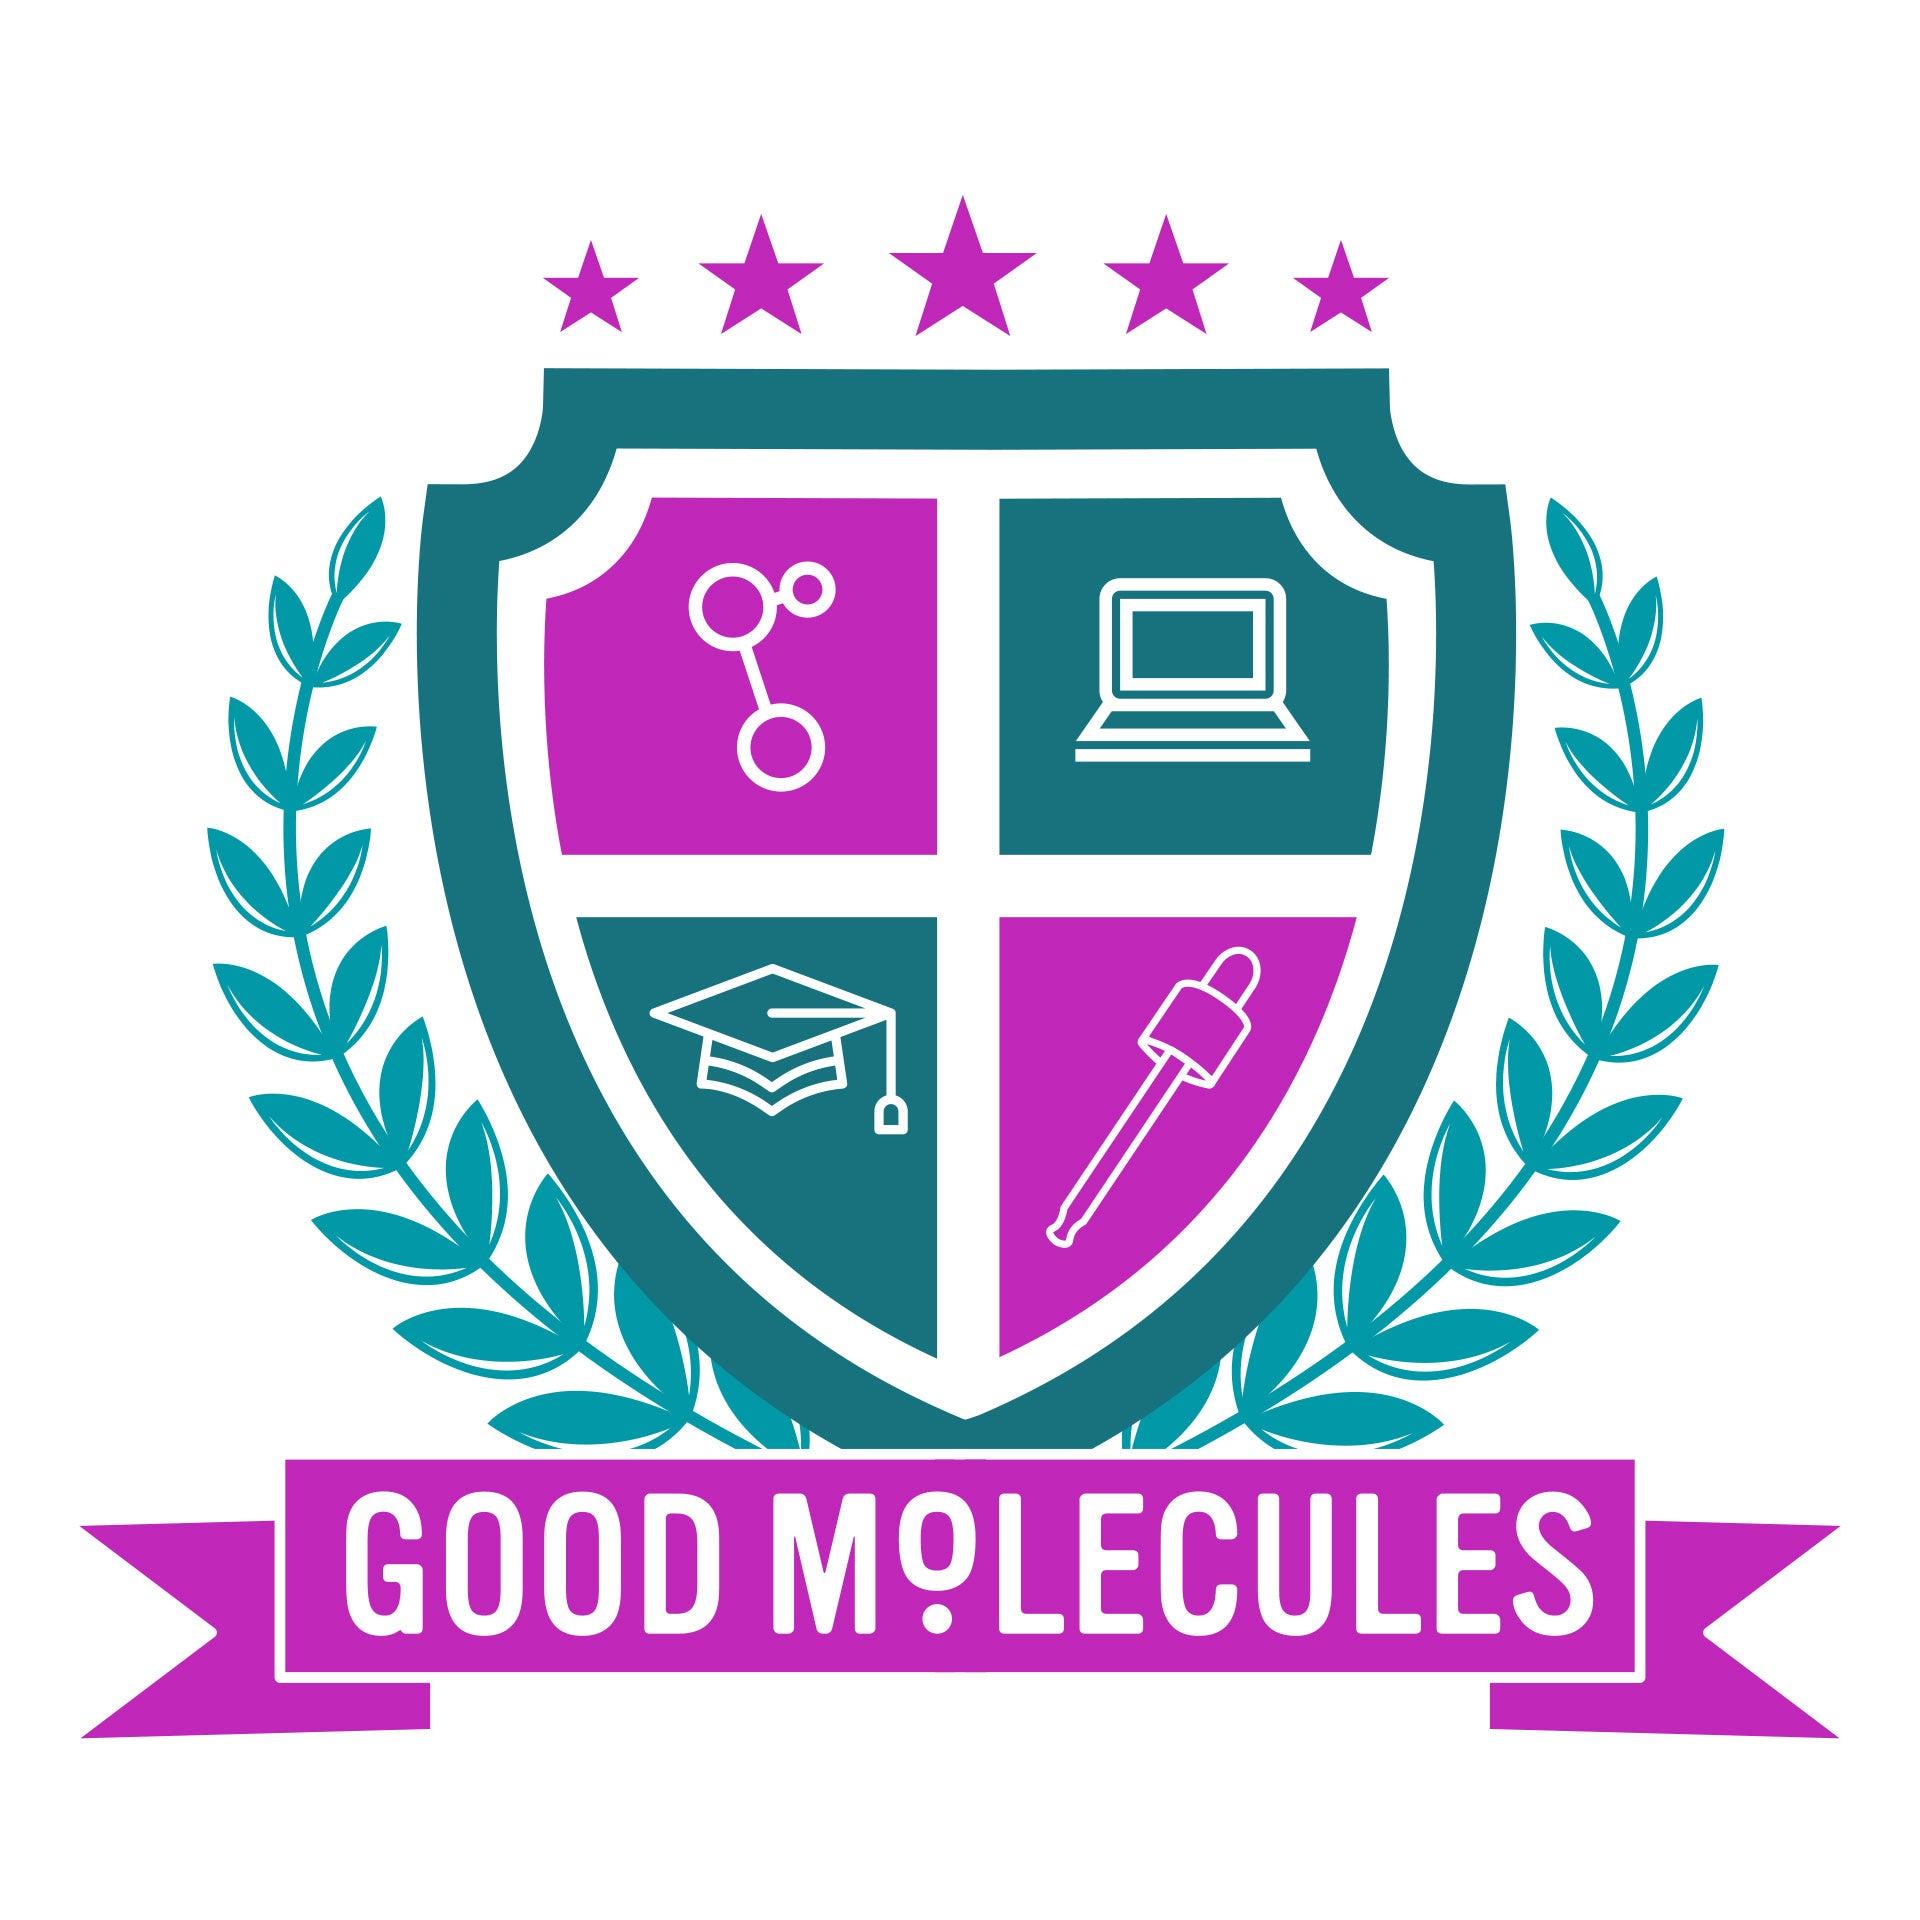 Good Molecules is coming to the University of Memphis!